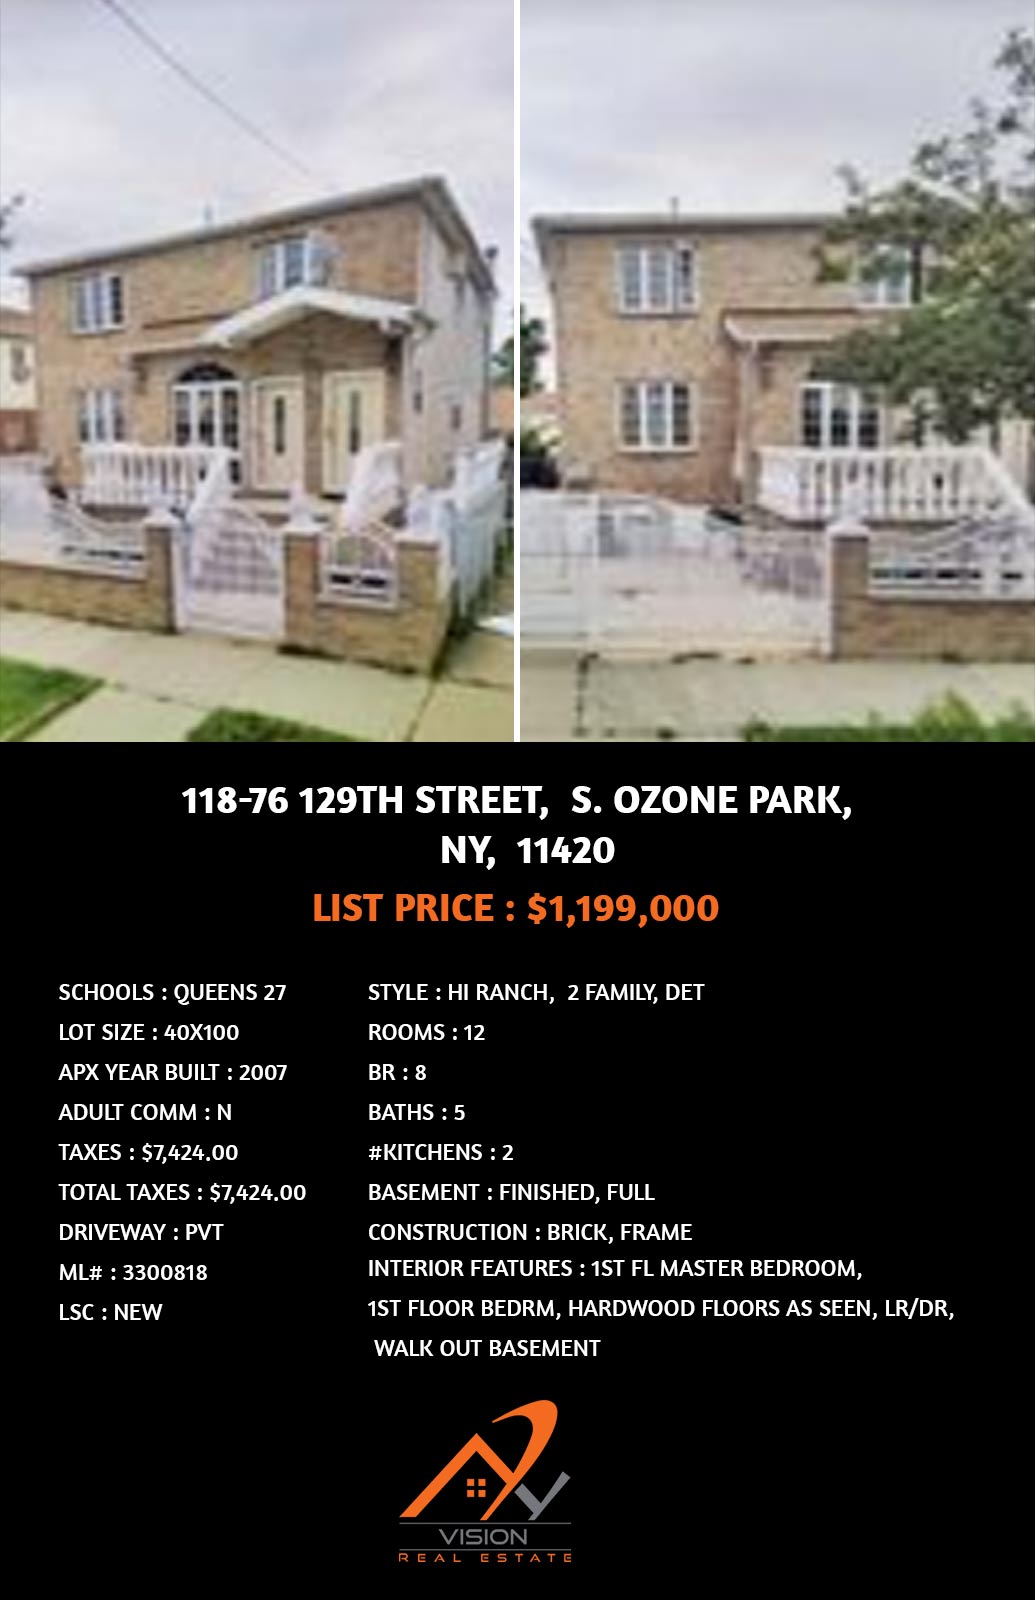 Homes for Sale Ozone Park, NY